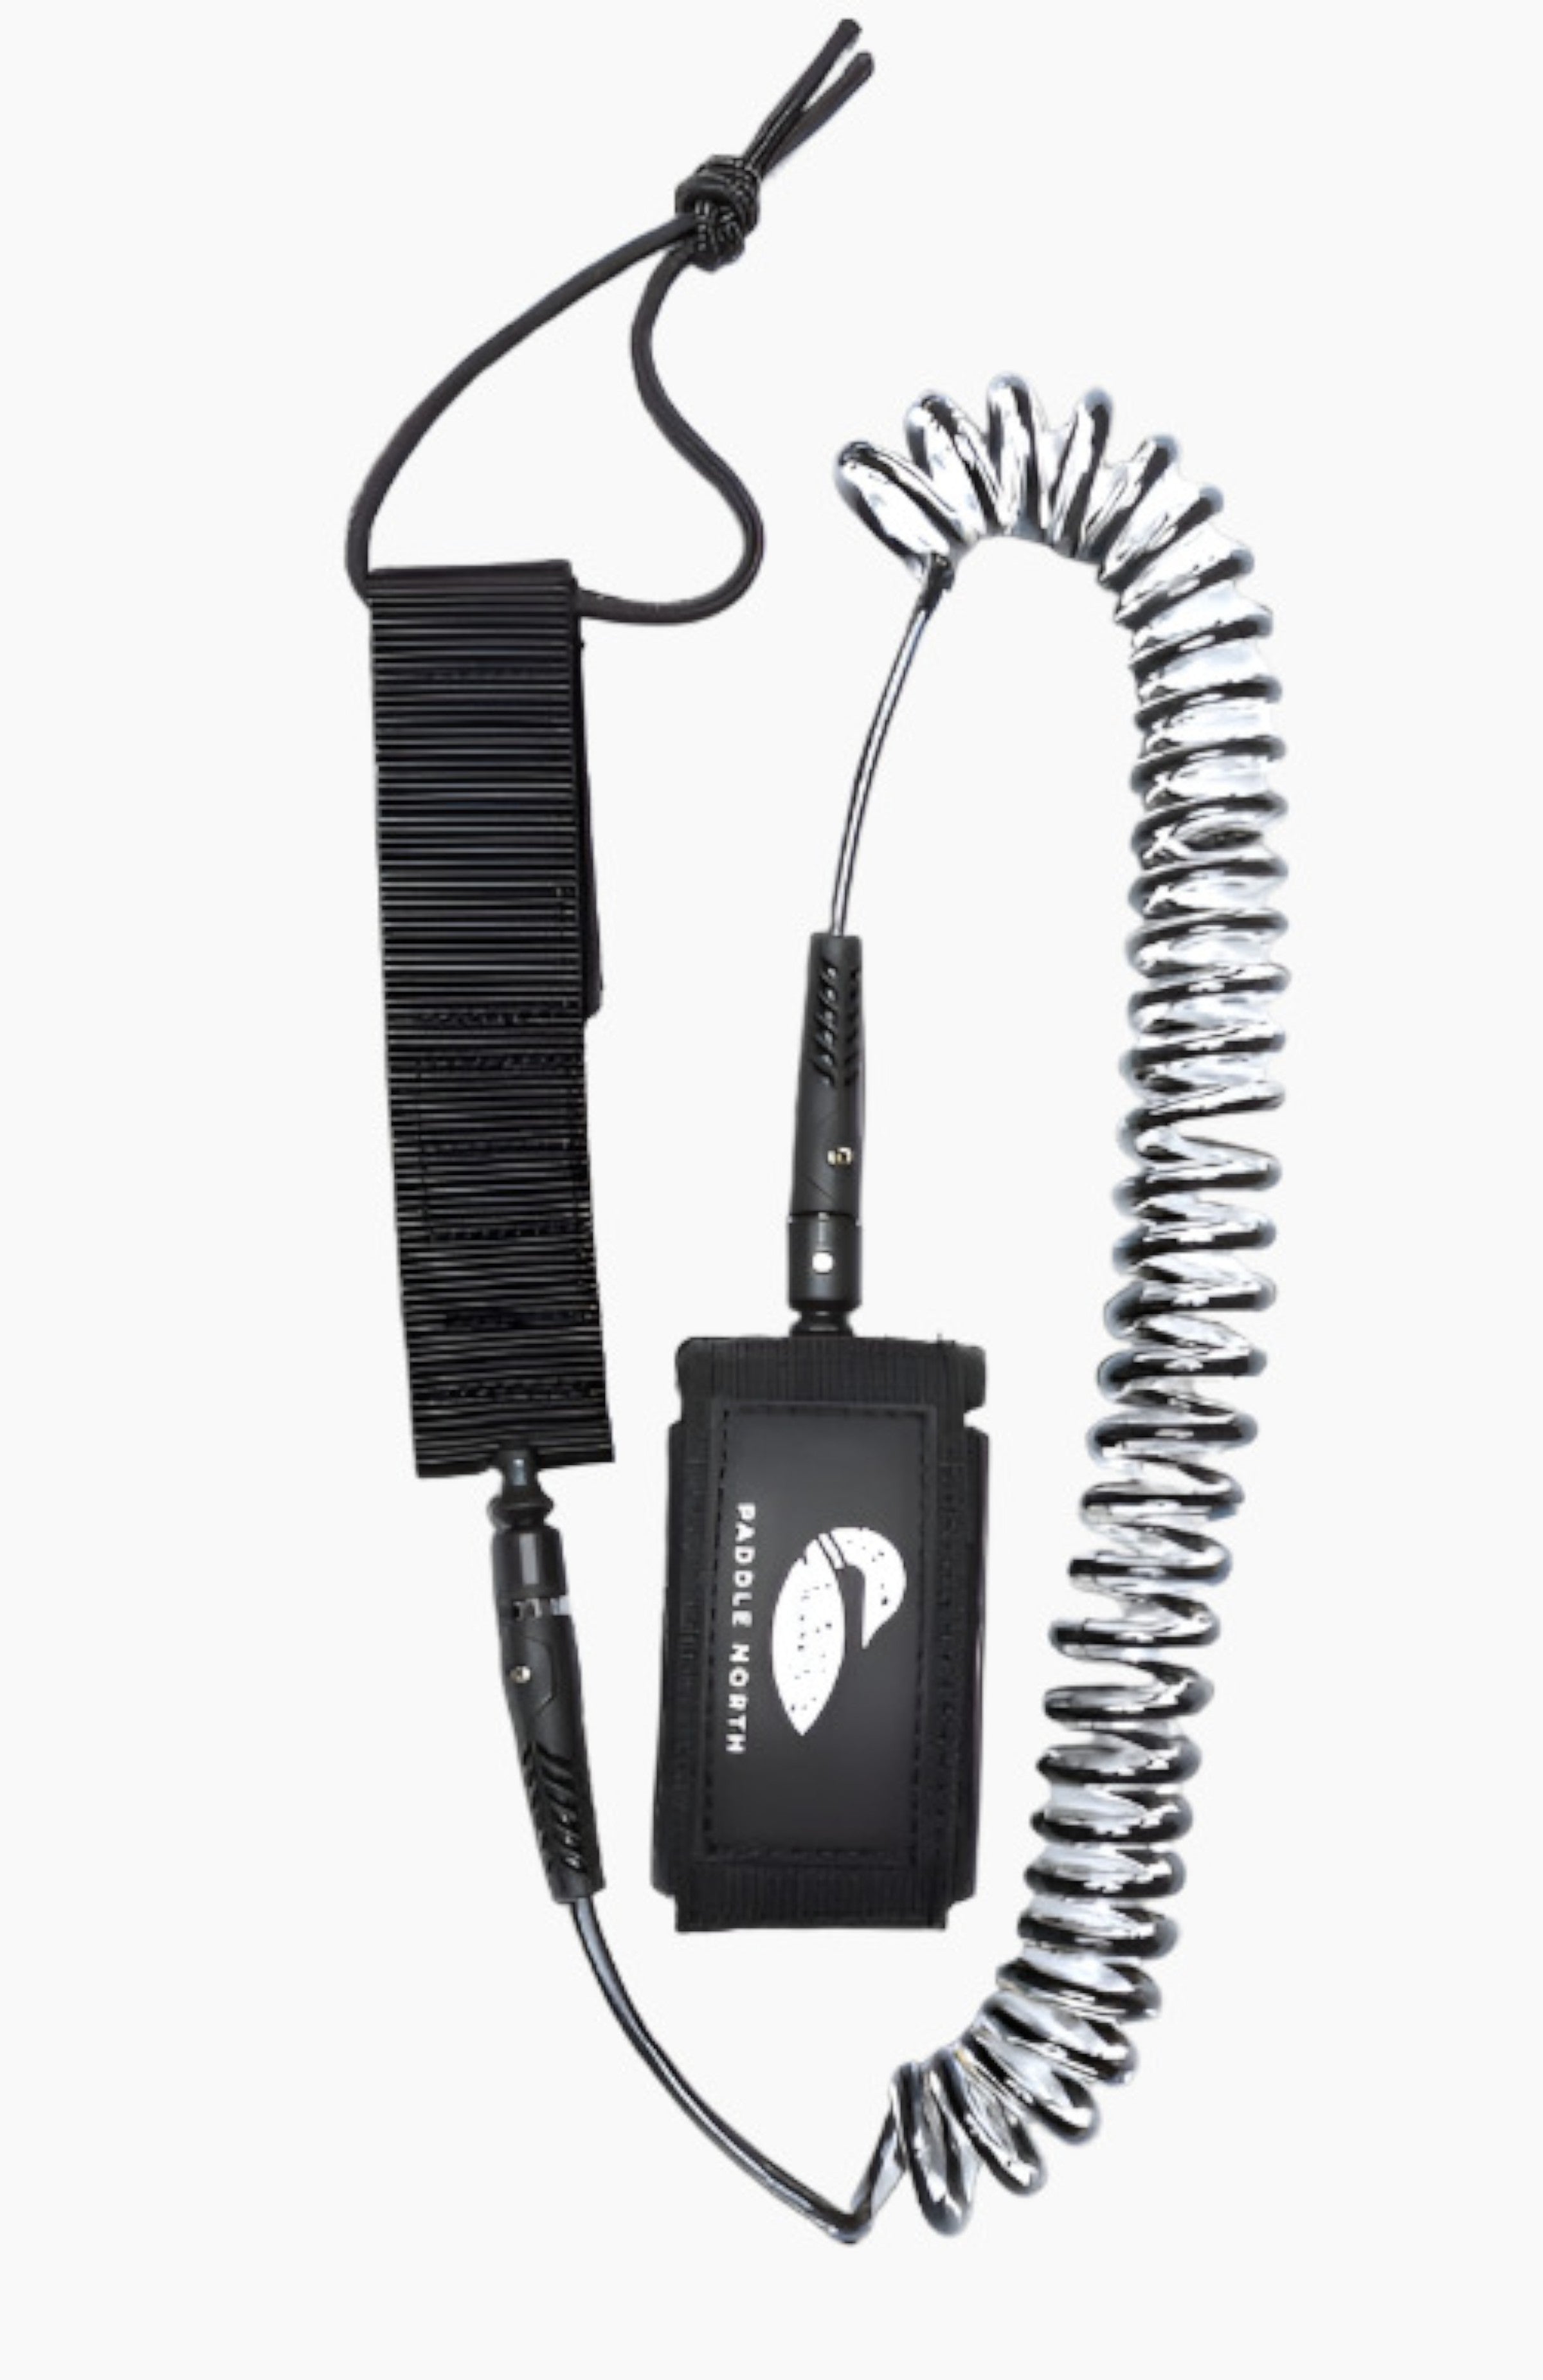 Paddle board accessories: The 10' SUP Leash consists of a black velcro anklet and clear plastic bungee that connects your stand up paddle board to your body.